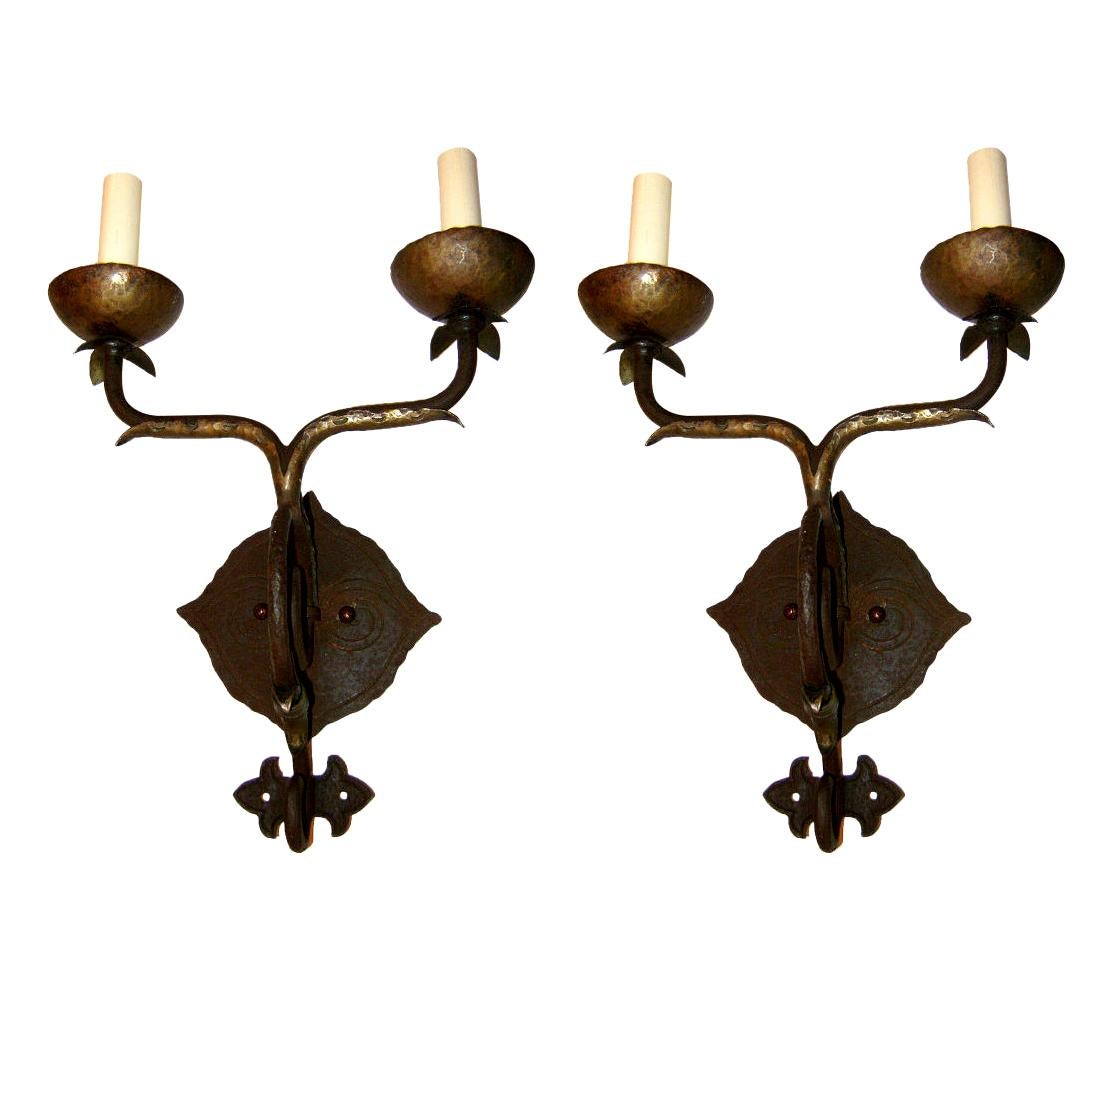 Pair of 1930's American hammered iron arts and crafts two arm sconces.

Measurements:
Height: 8.5